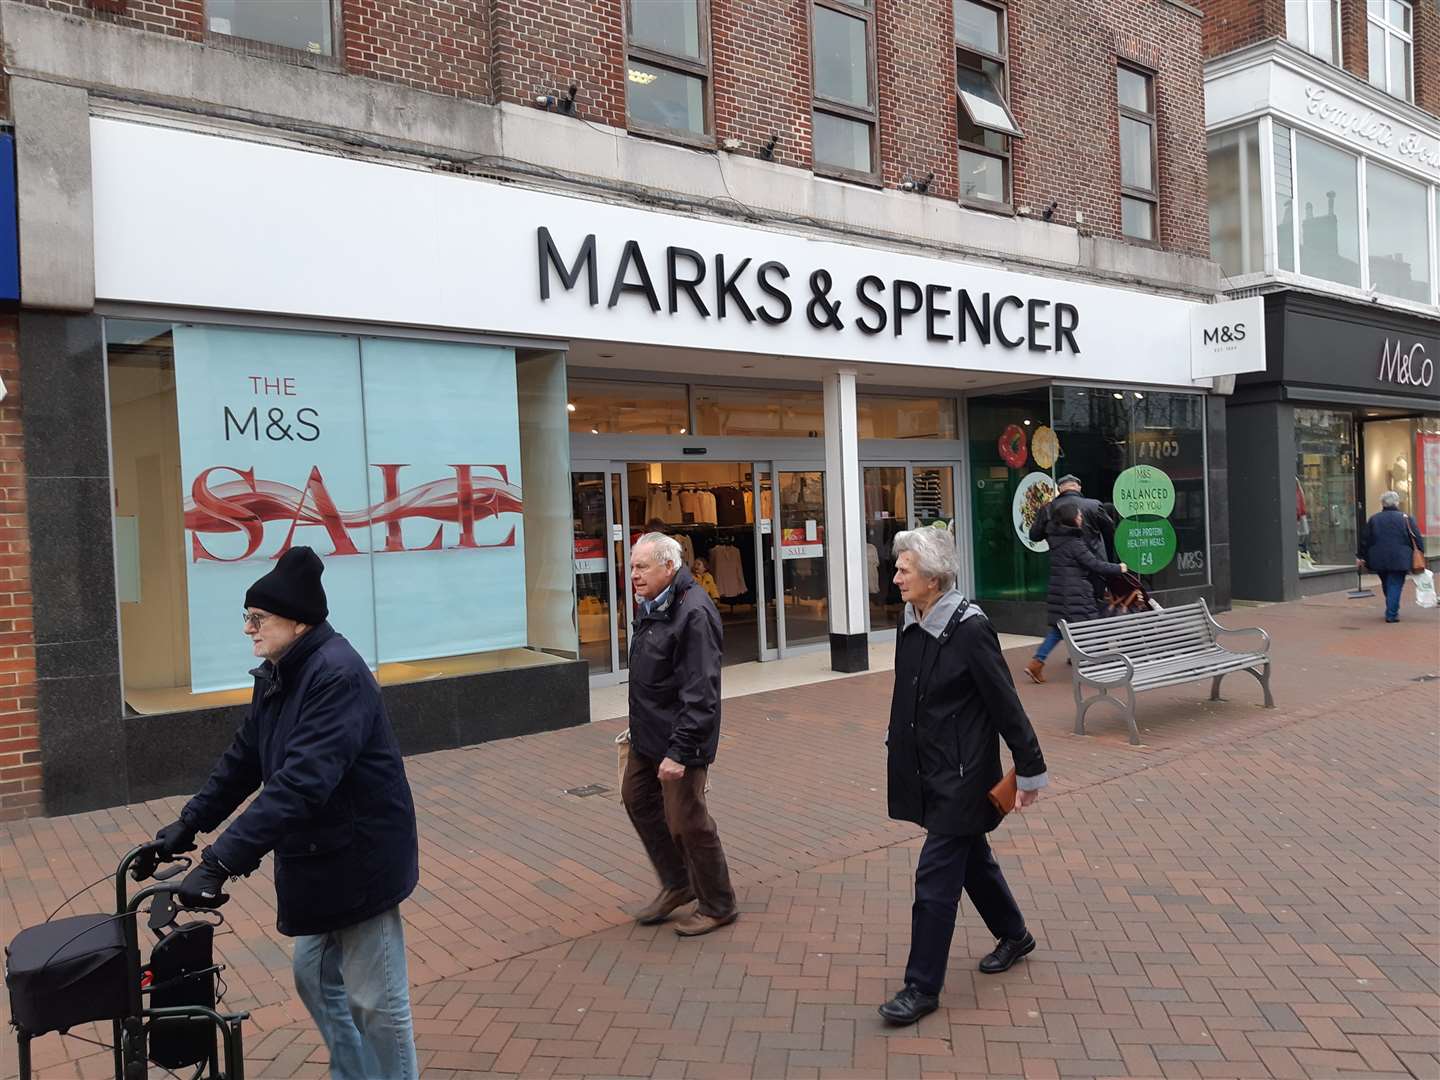 M&S in Deal has been described as the hub of the High Street